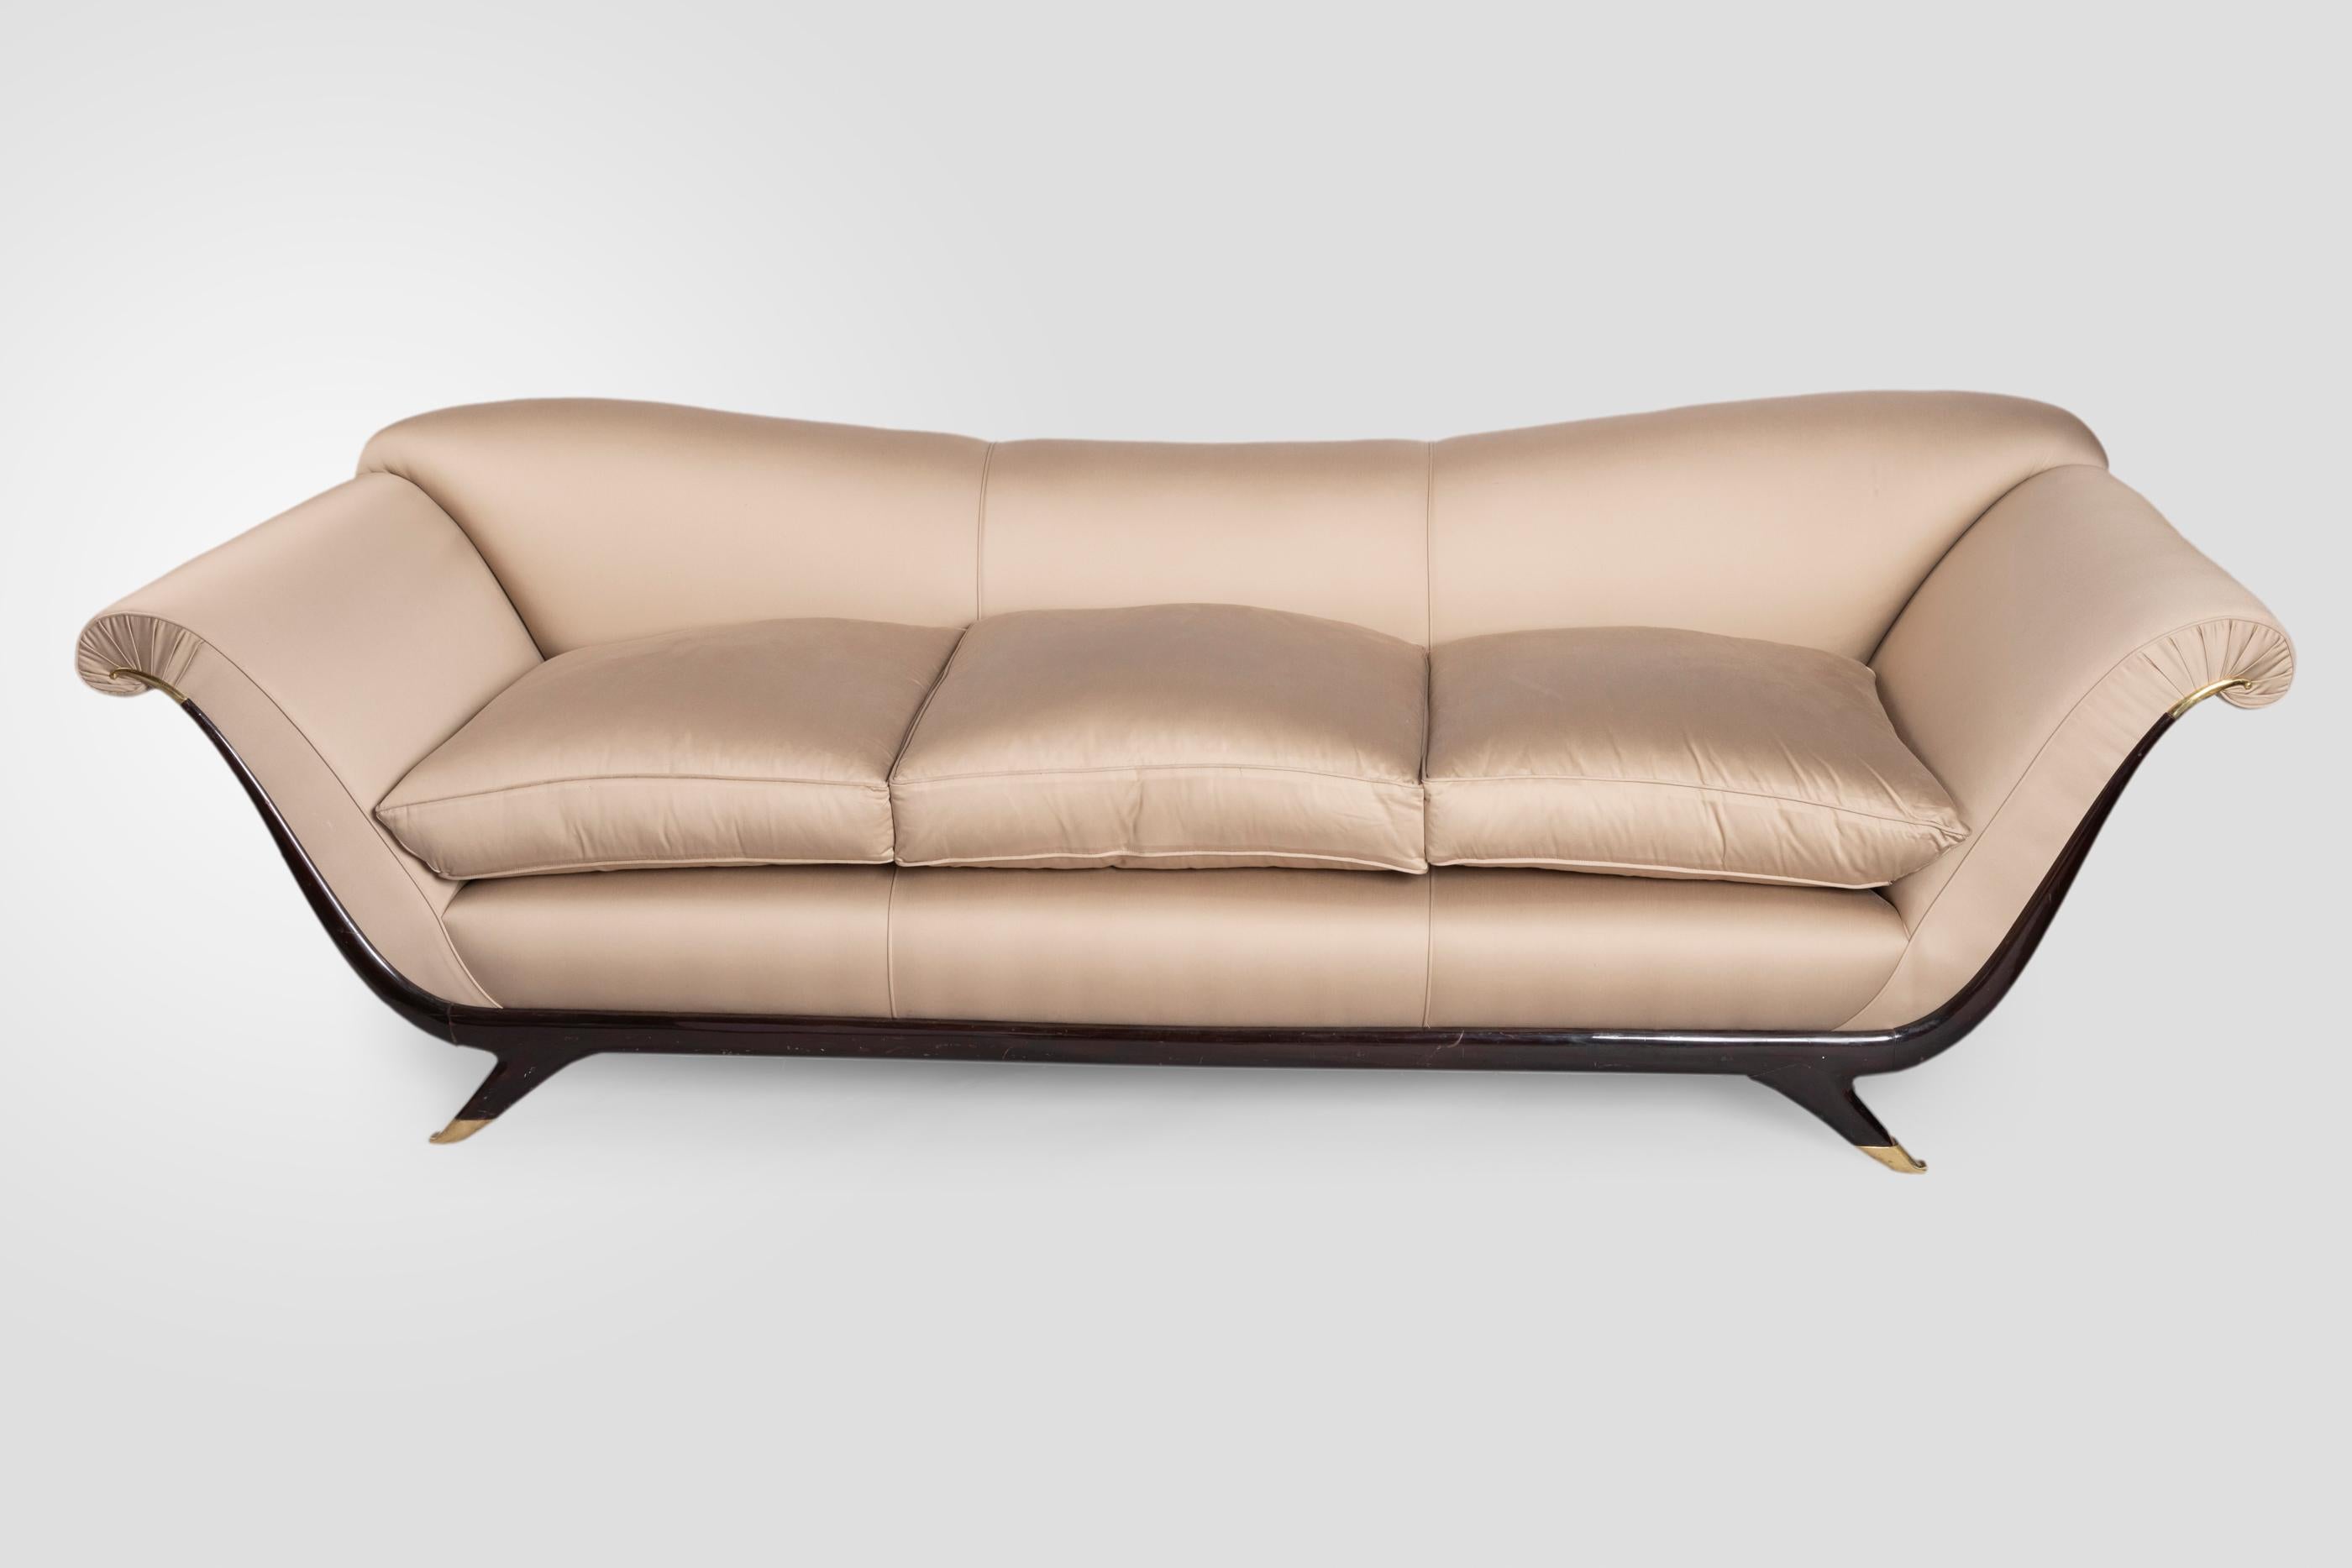 Luxurious, sofa upholstered in a beautiful taupe silk fabric (Pierre Frey). It is an elegant sofa designed by Italian artist Guglielmo Ulrich who became head designer home furnishing company Arca. (well-known for high quality and premium materials).